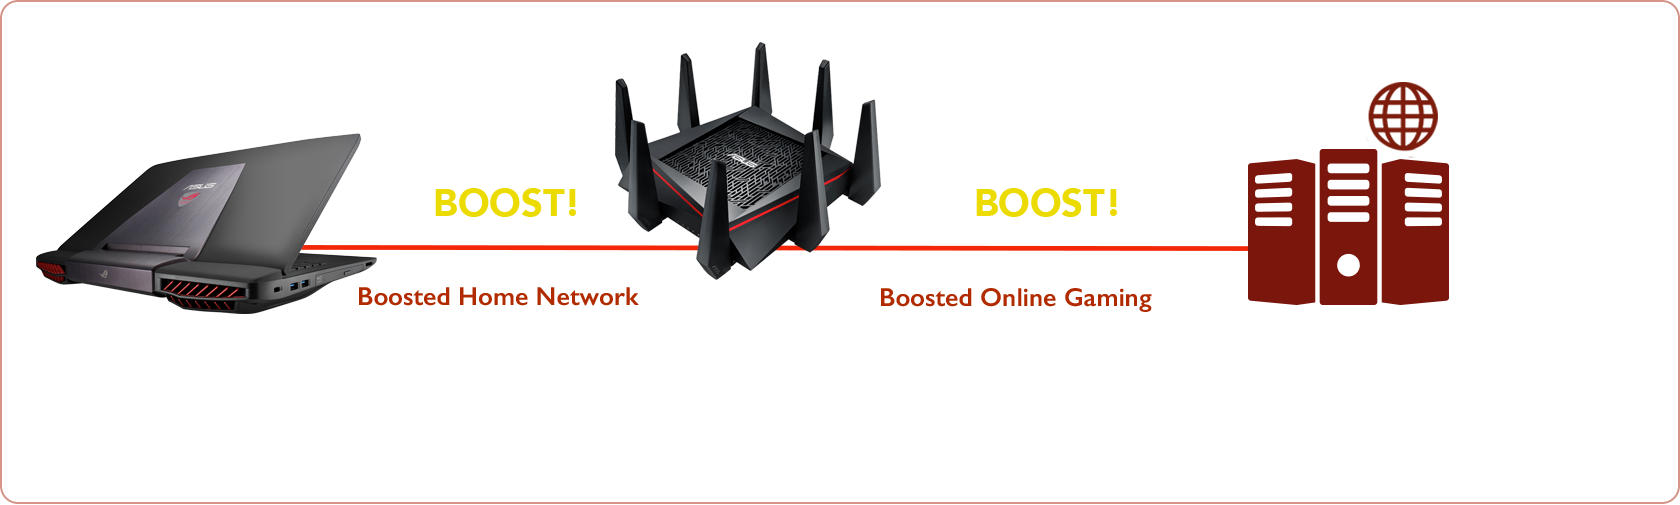 RT-AC5300｜WiFi Routers｜ASUS USA